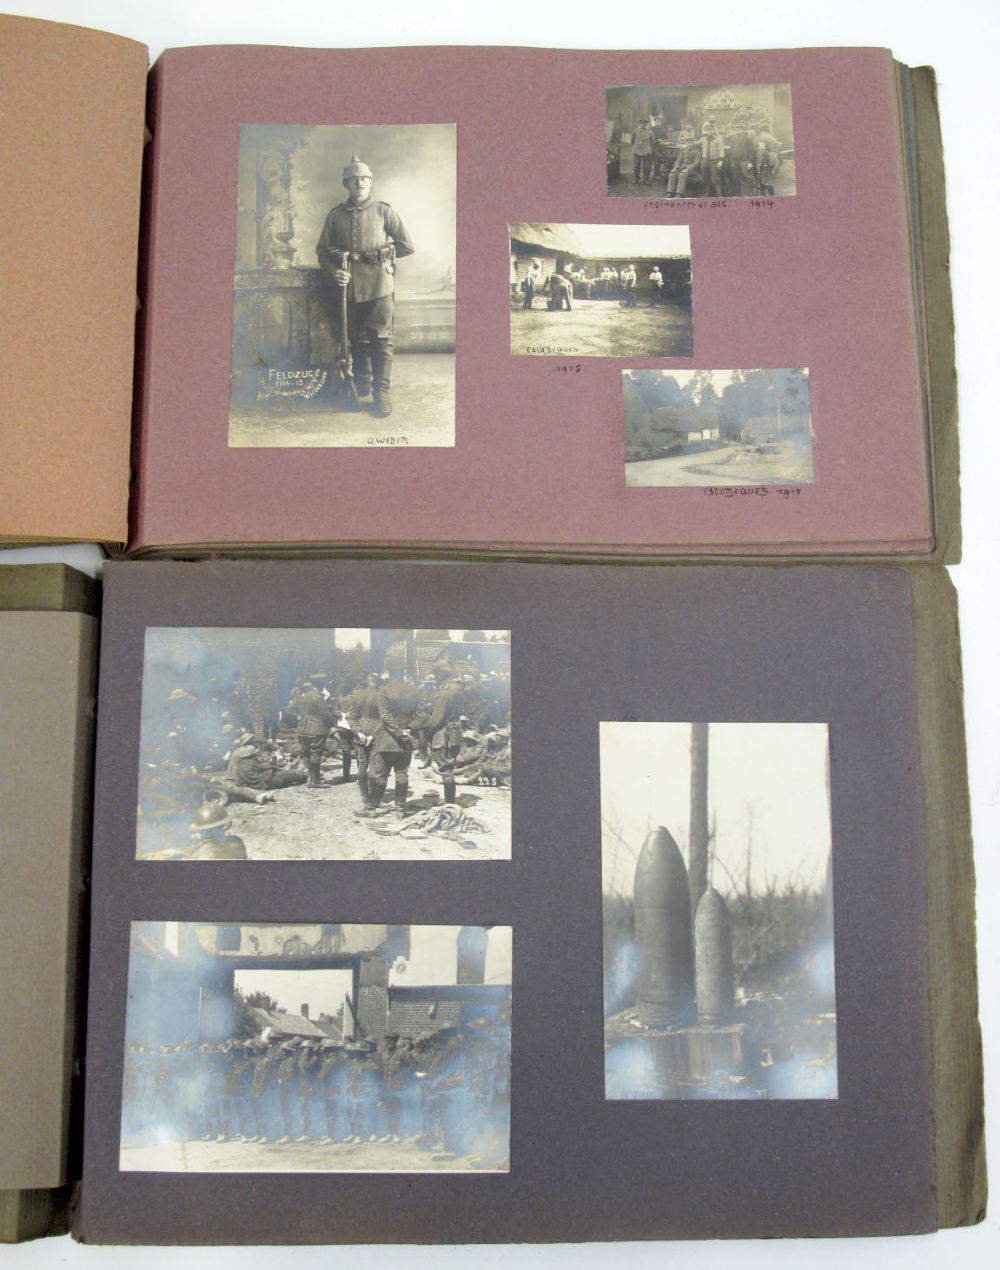 Imperial German Photograph Album Pair, the albums consist of snapshot photographs and postcards. The